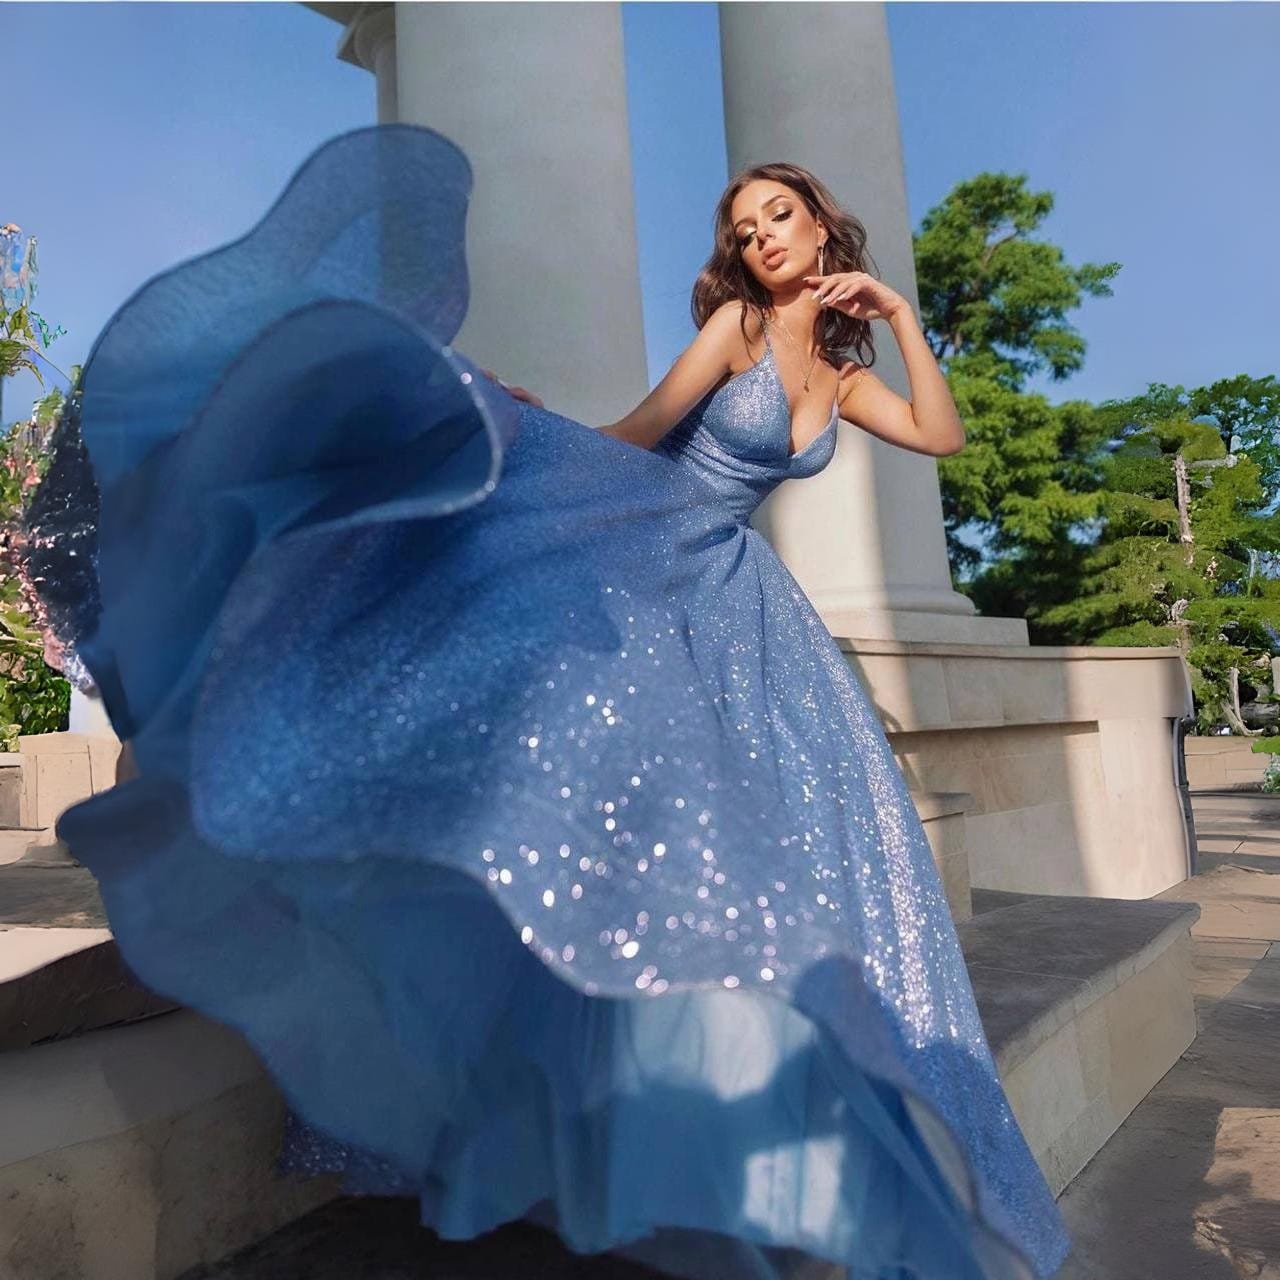 100+ Free Ball Gown & Dress Images - Pixabay